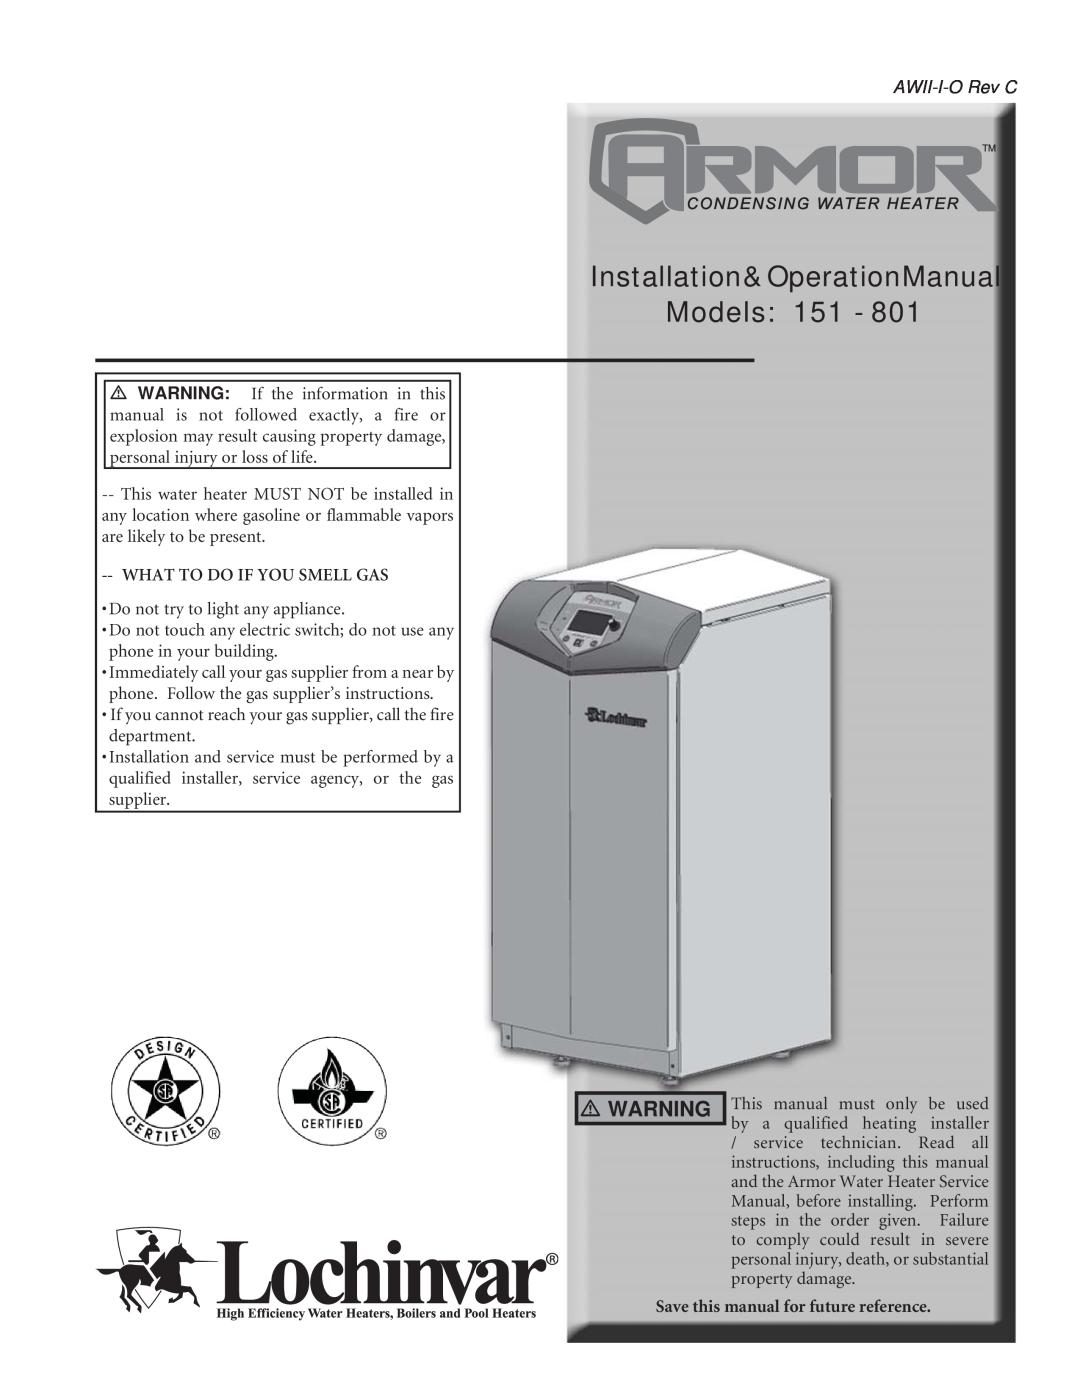 Lochinvar 286 manual OKB-USERRev A, Save this manual for future reference, Outdoor Knight Boiler User’s Information Manual 